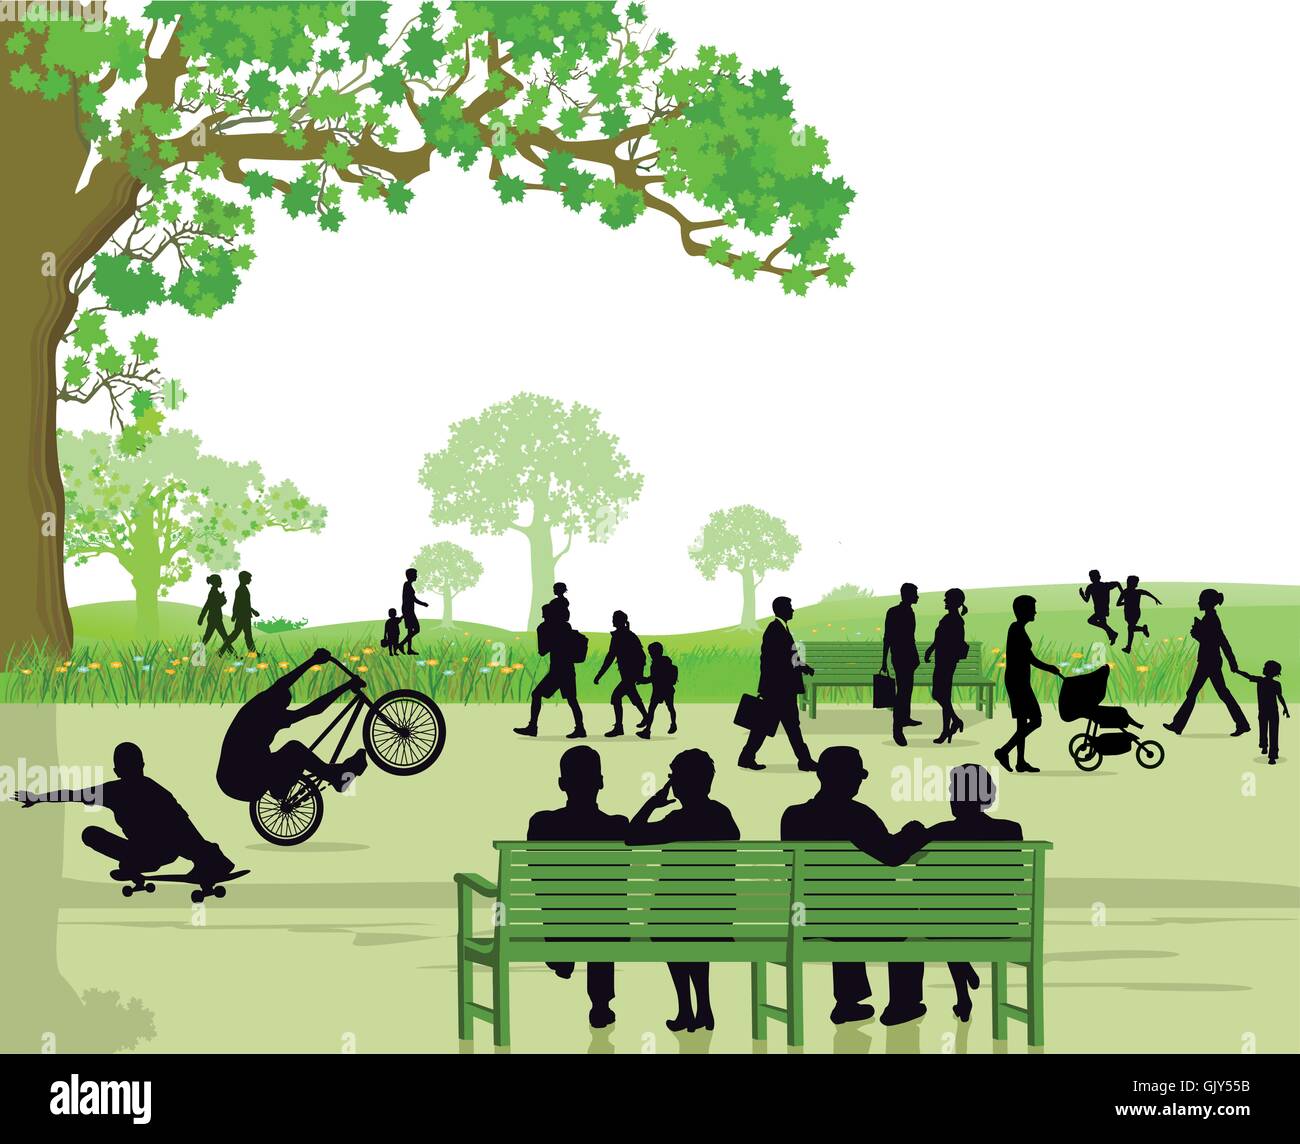 People in the park area Stock Vector